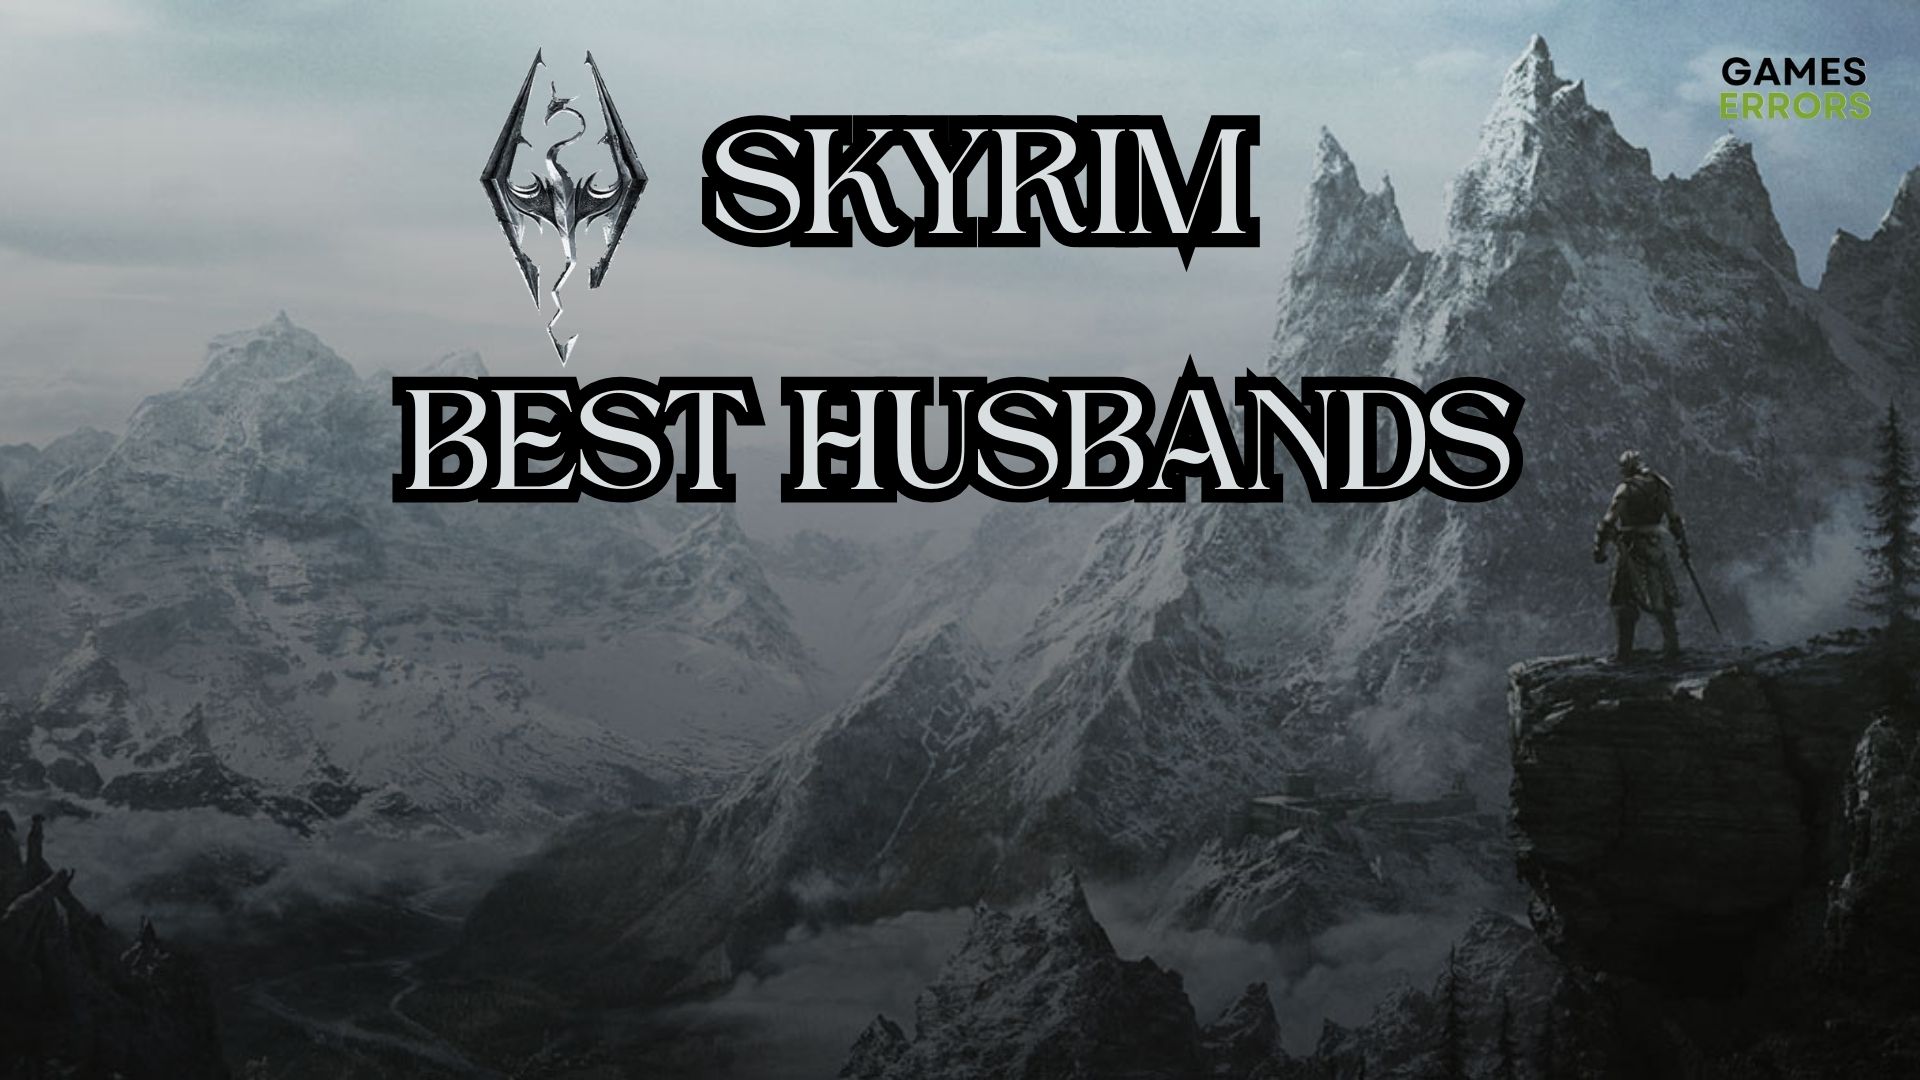 Best Husbands In Skyrim: 15 Top-Rated Options